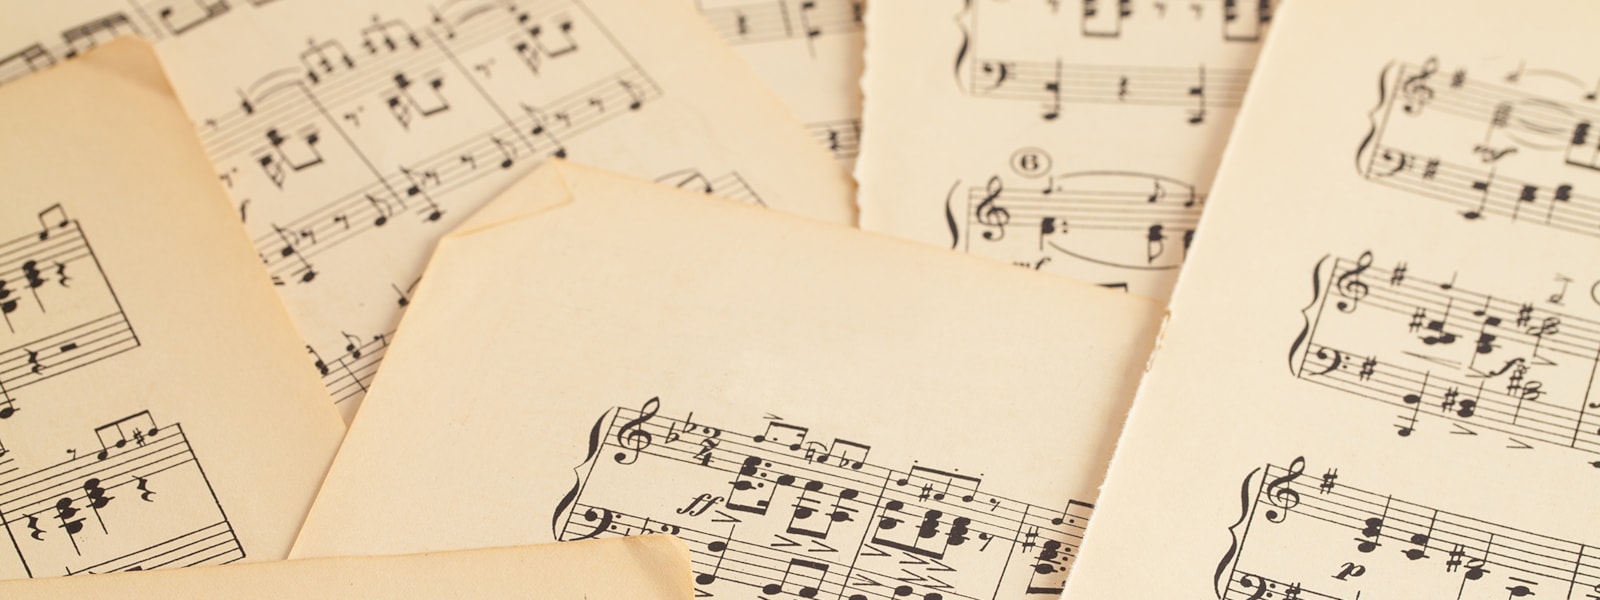 Pages of sheet music layered on top of each other